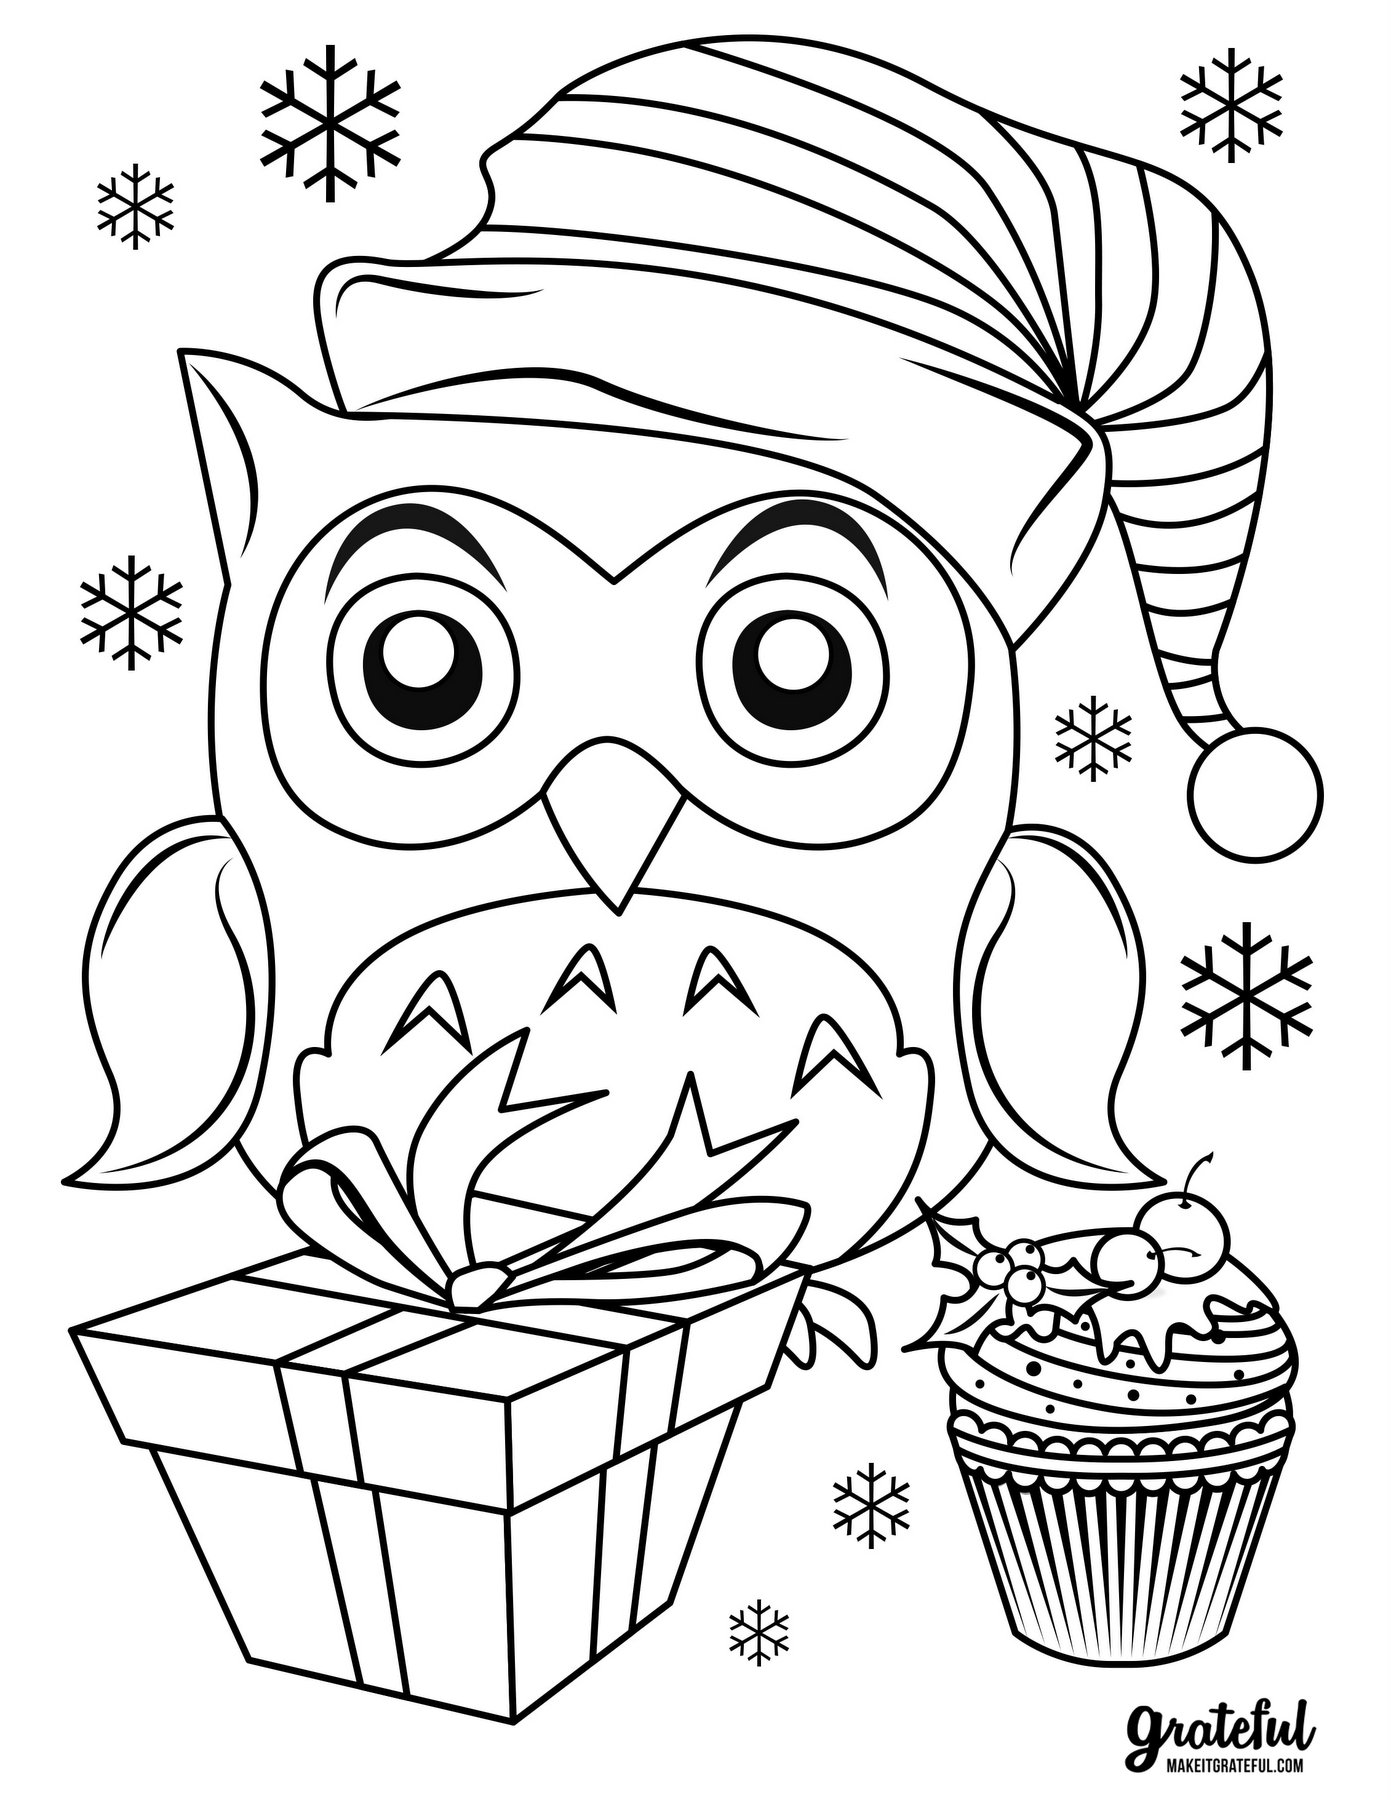 5 Christmas coloring pages your kids will love Christmas Presents Coloring Sheets